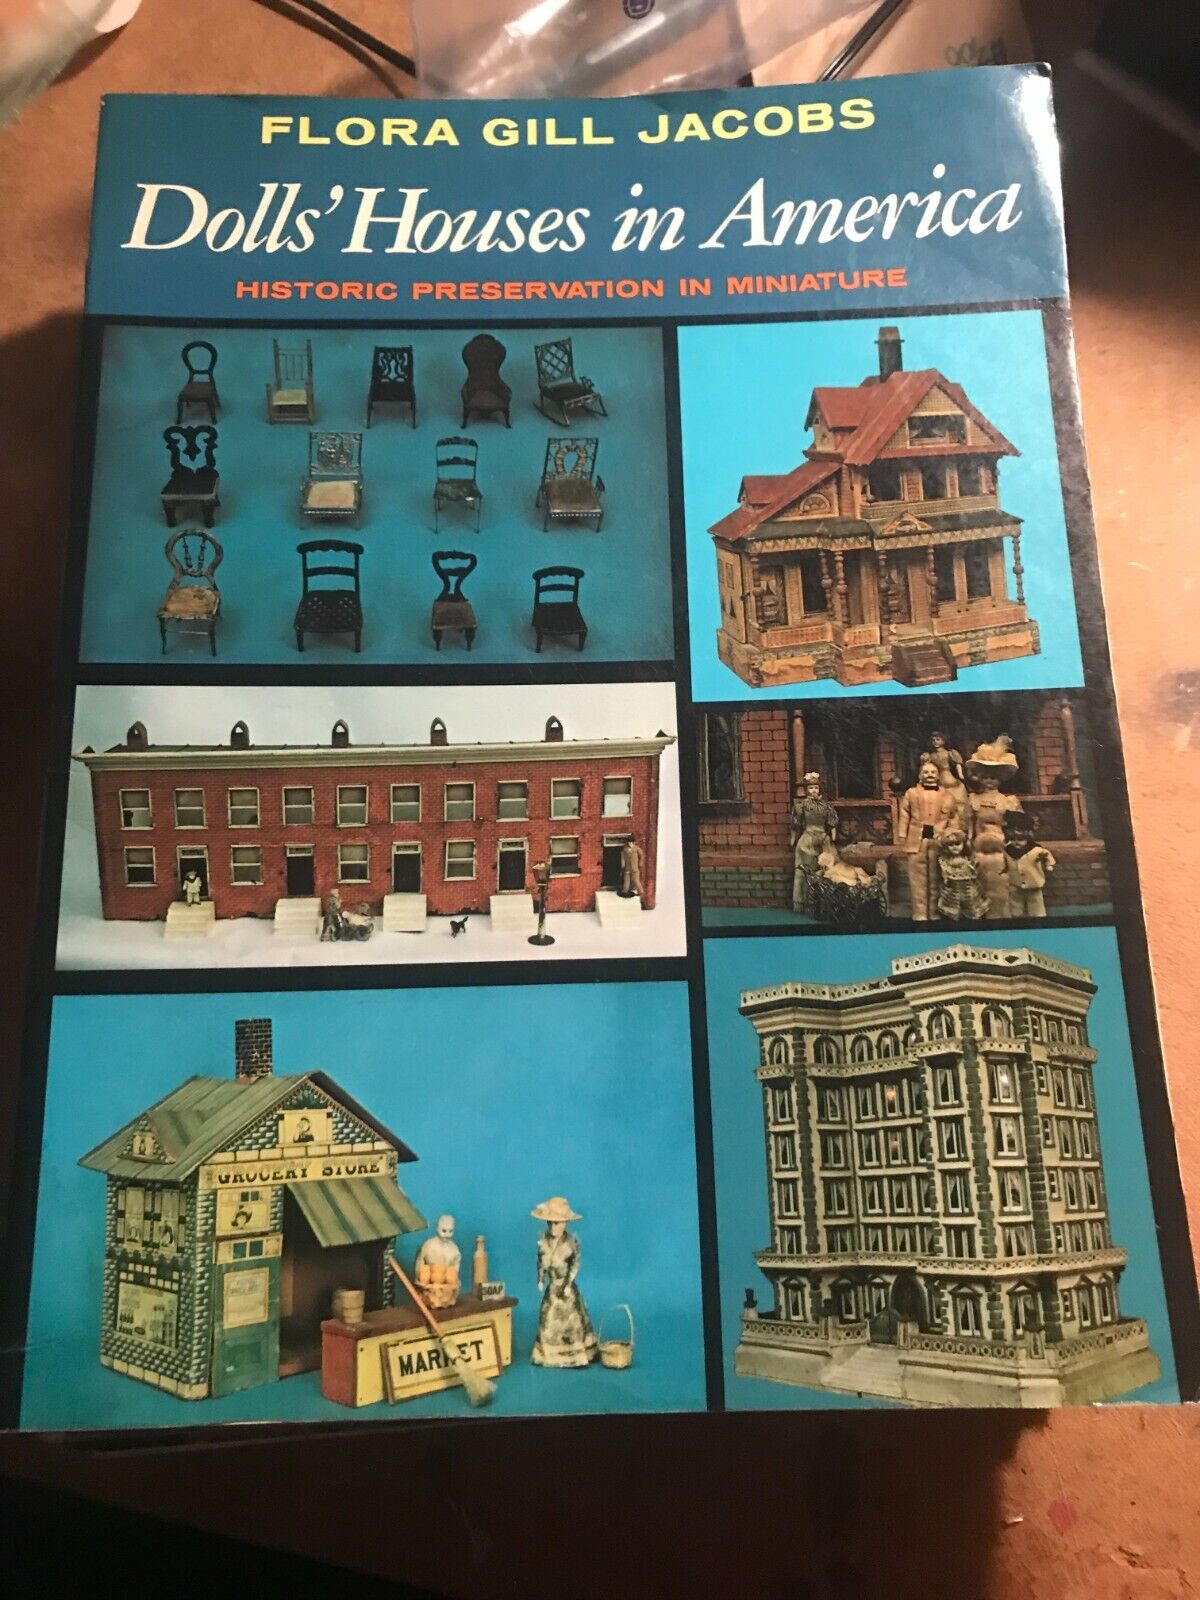 Dolls' Houses In America, Historic Preservation In Miniature - Flora Gill Jacobs